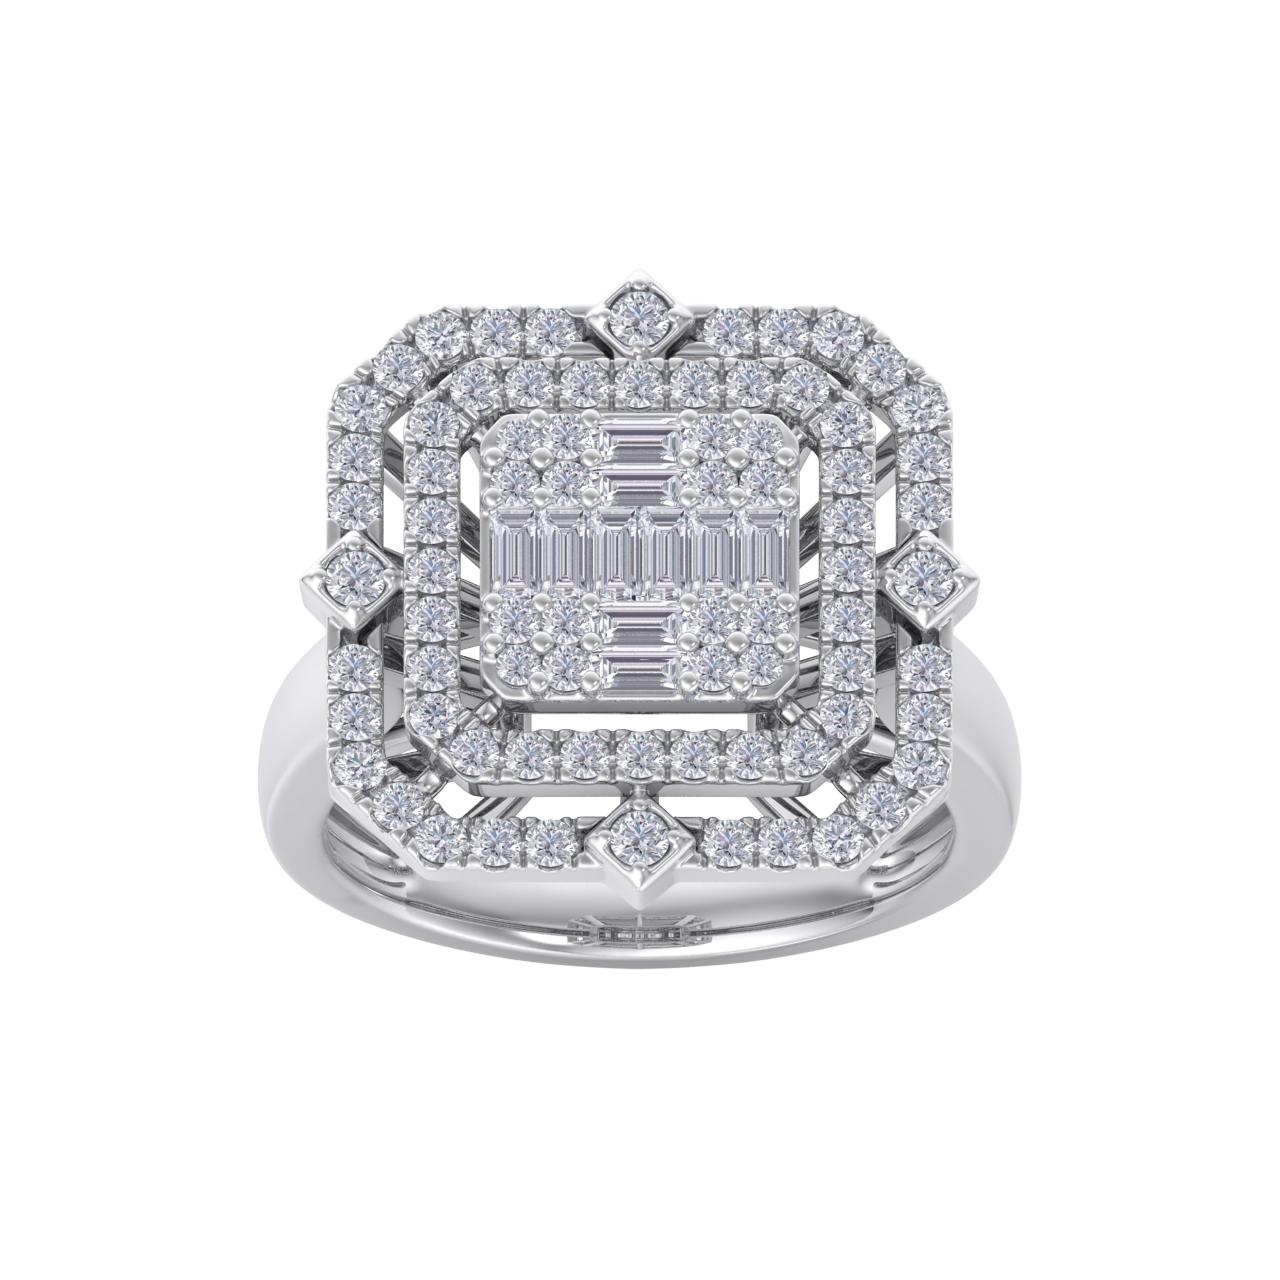 Grande square diamond ring in white gold with white diamonds of 1.36 ct in weight